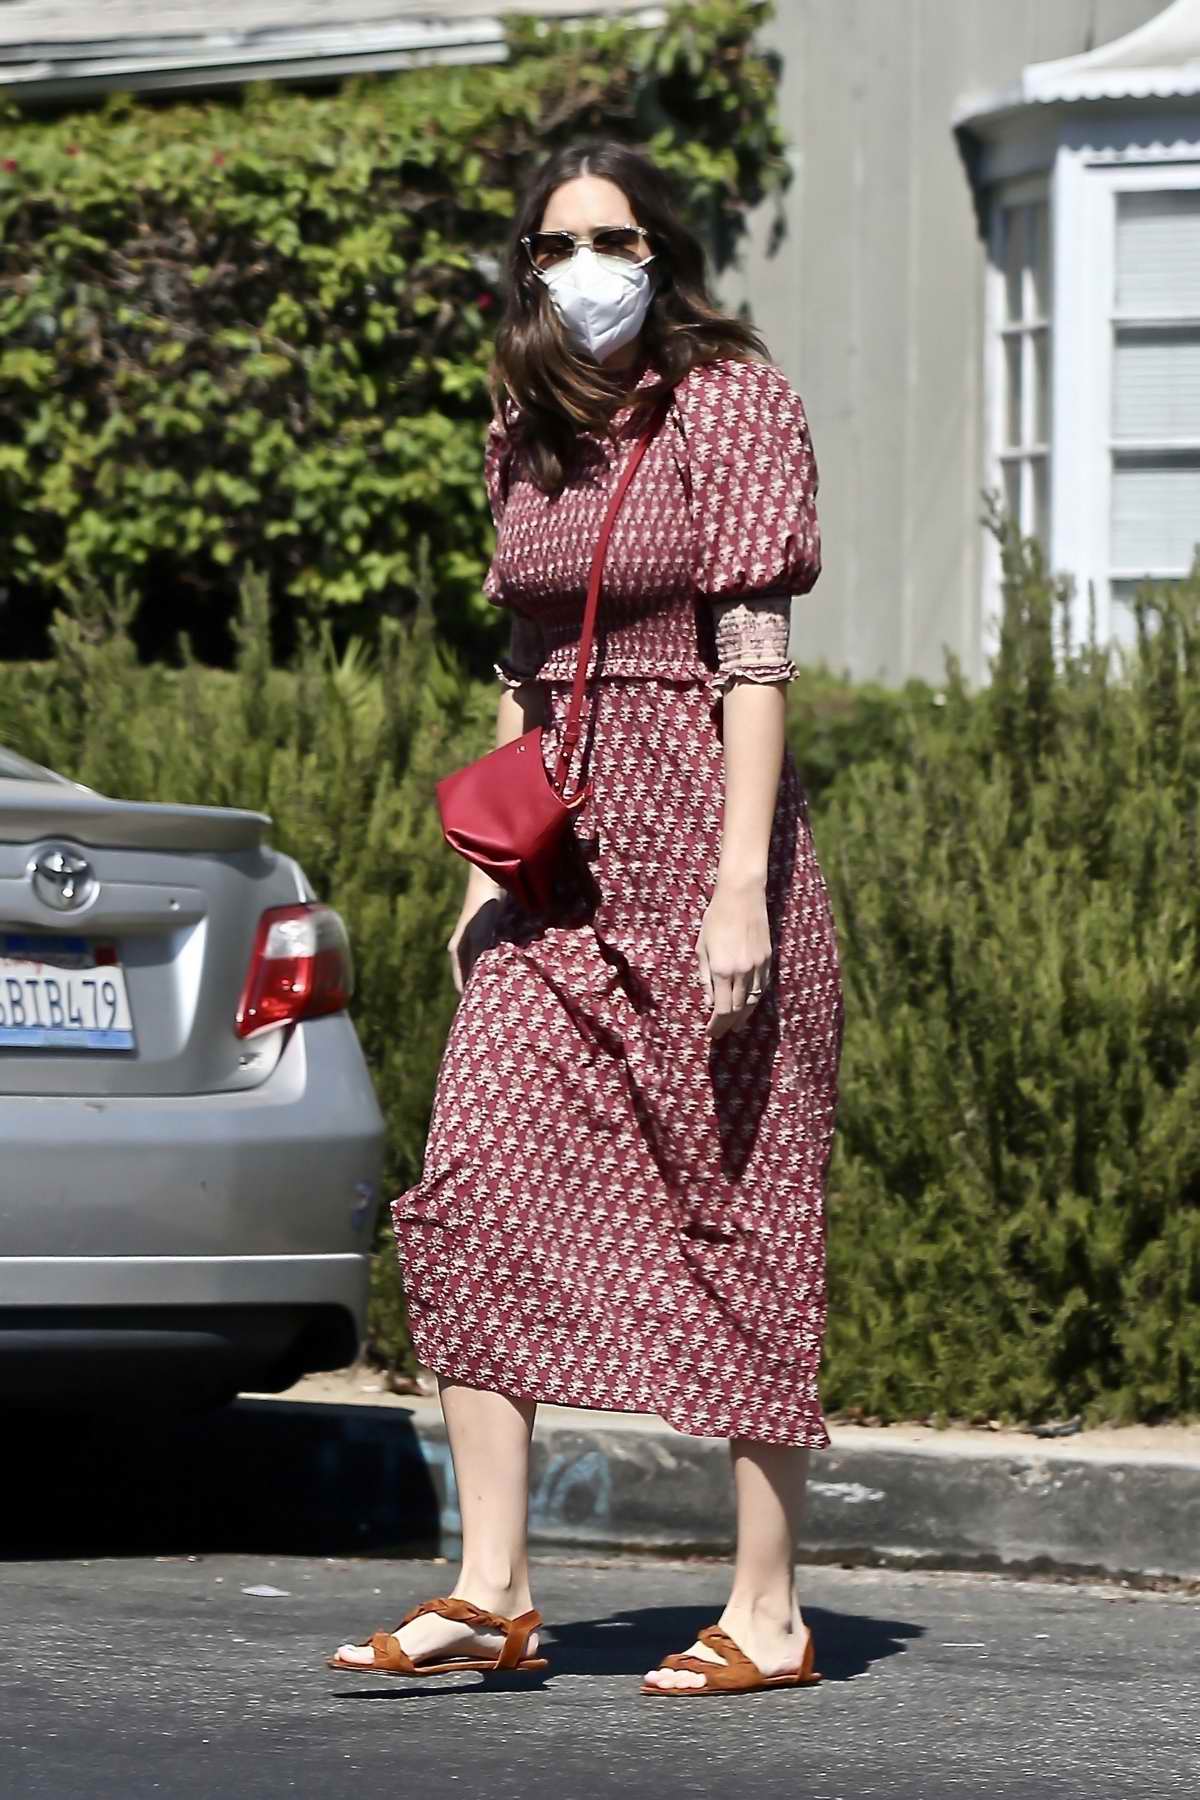 mandy moore shows off her growing baby bump in a printed dress as she ...